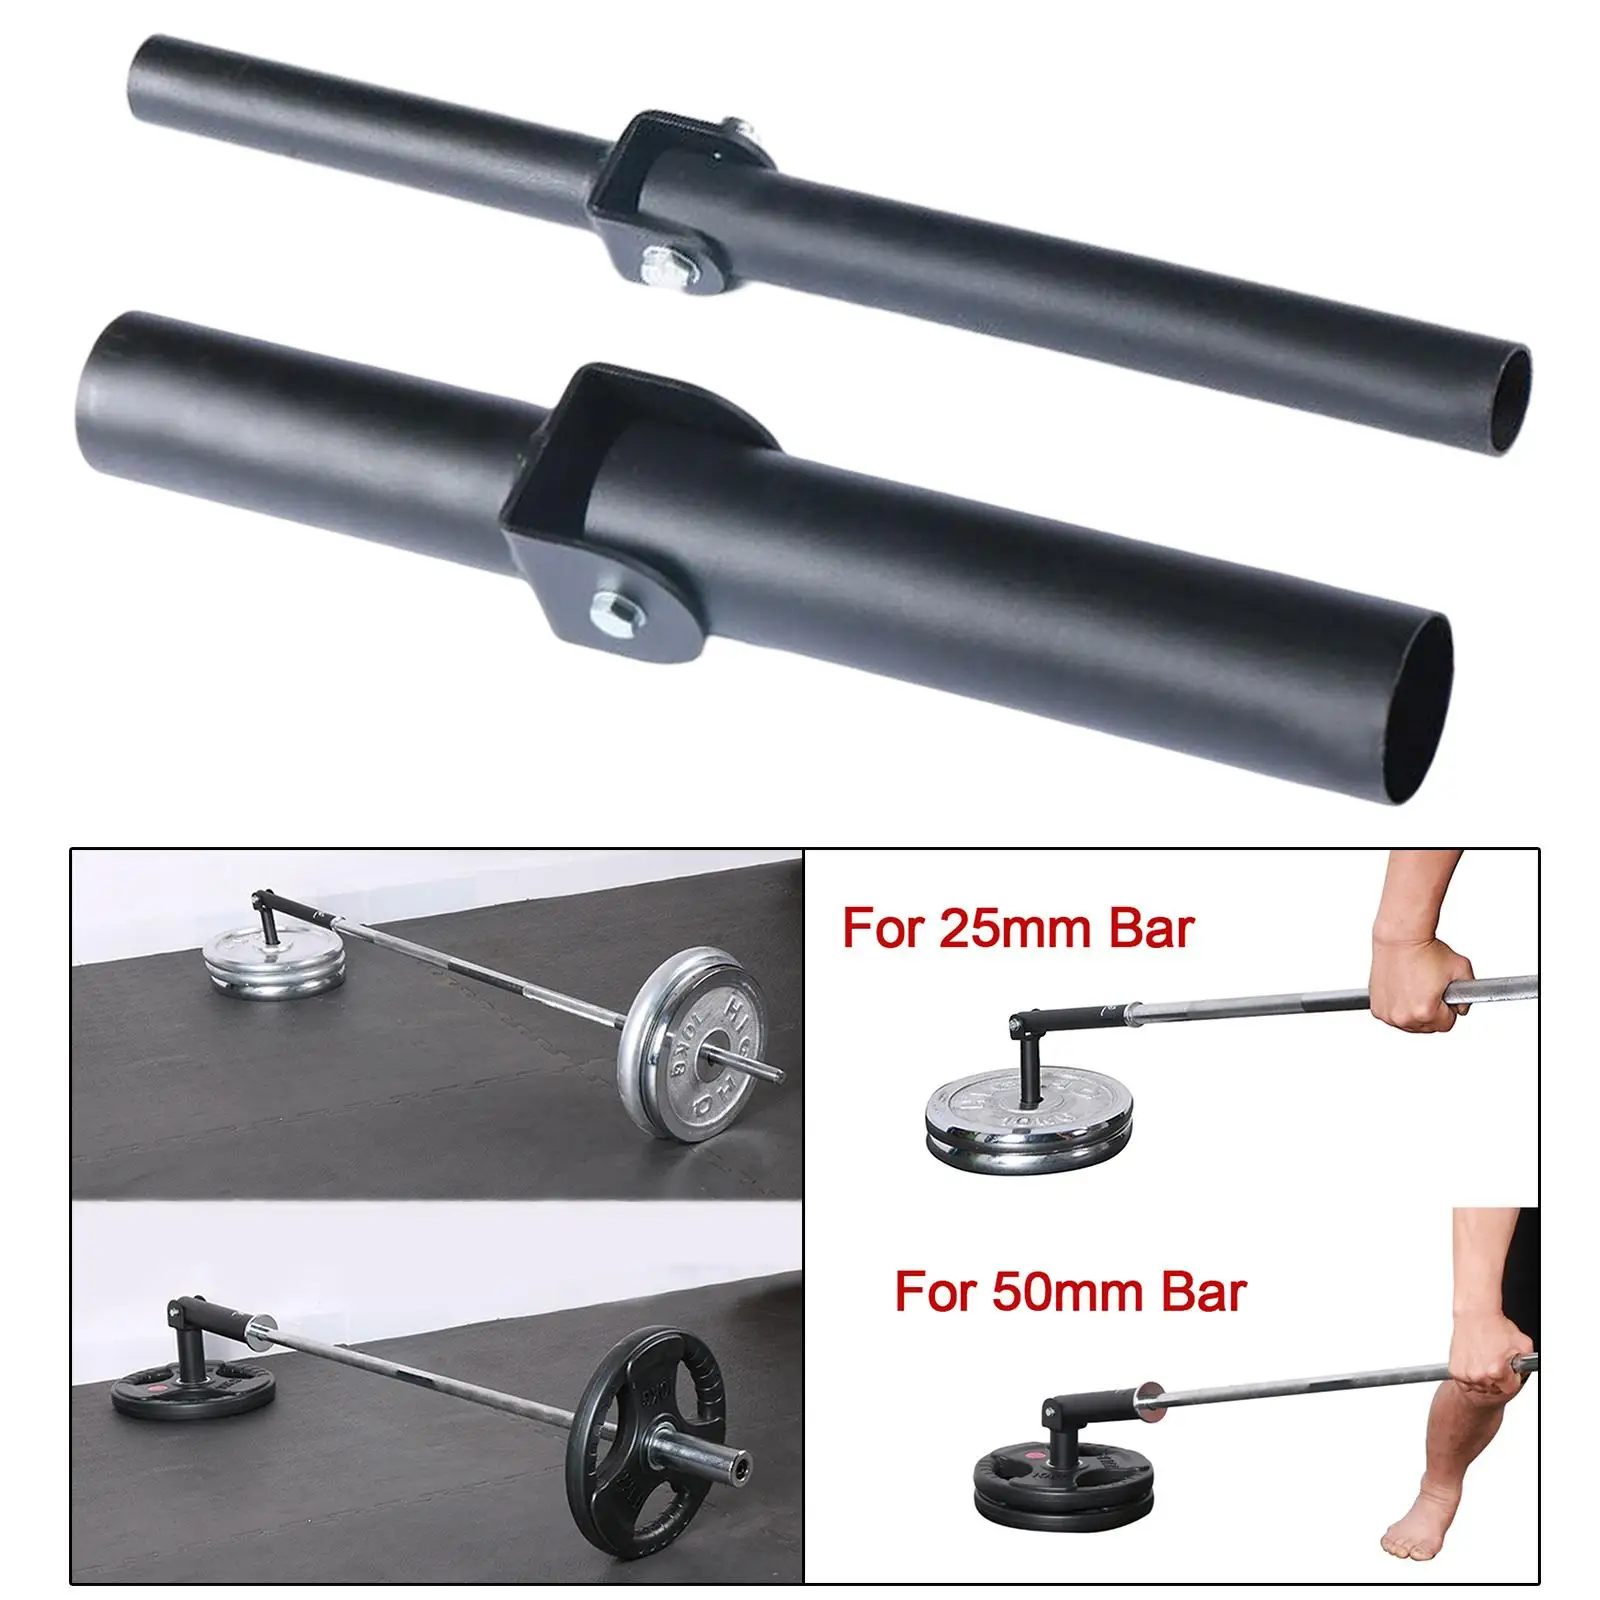 T Bar Row Plate Post Insert Landmine Barbell Attachment Easy to Install Multifunctional for Exercises Gym Fitness Home Deadlift